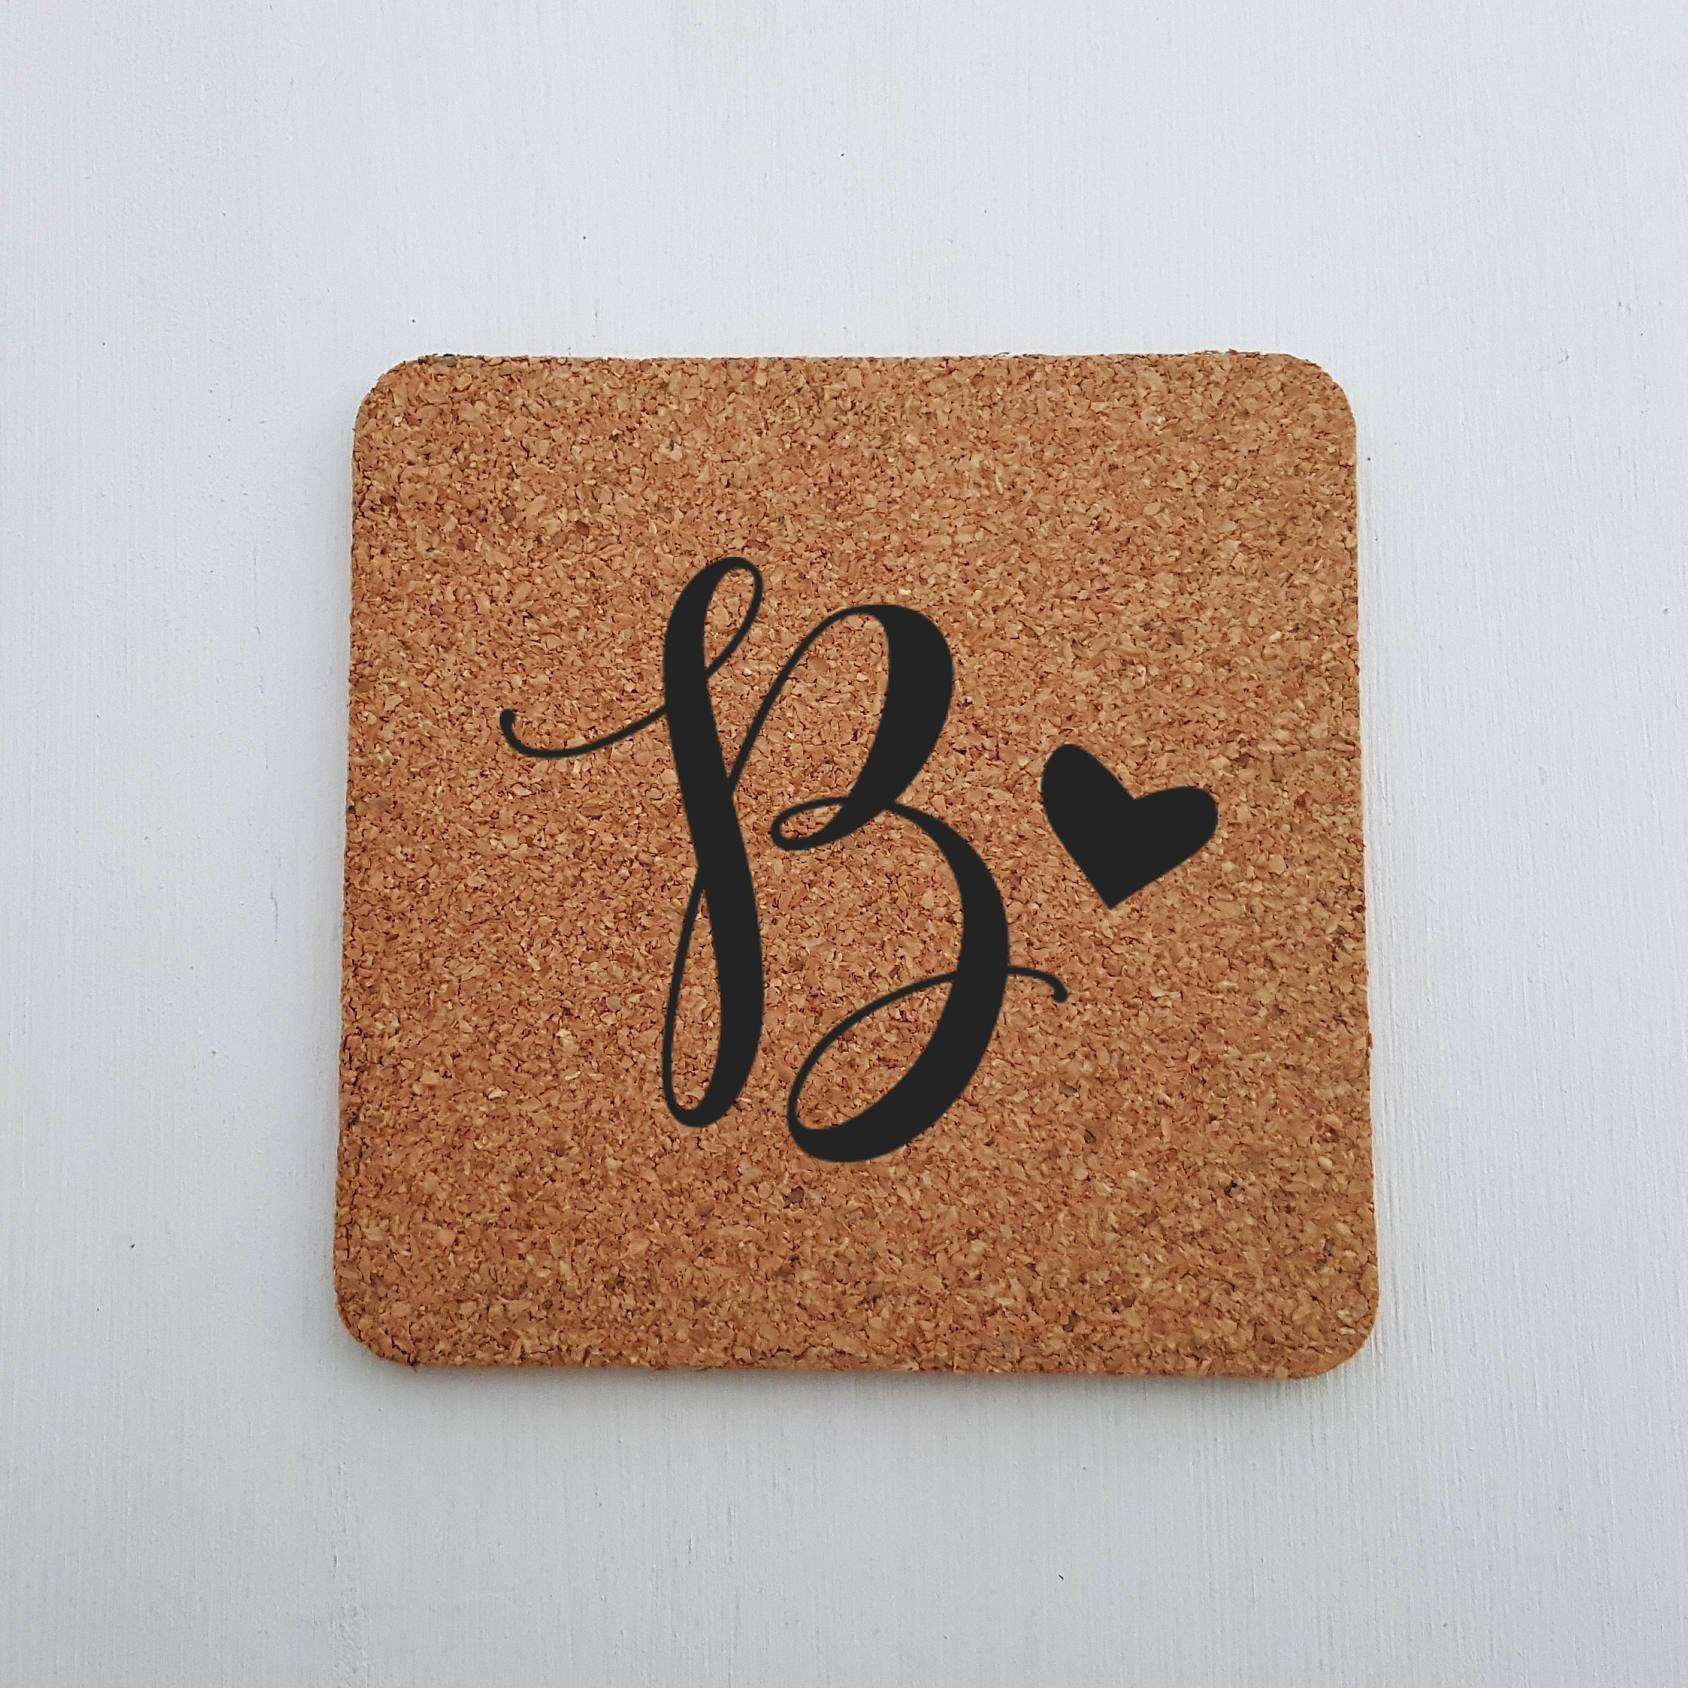 Laser Engraved Custom Cork Coaster, Initial with Cute Heart, Laser-, Personalized Wedding Gift, Housewarming Present, LGC10267